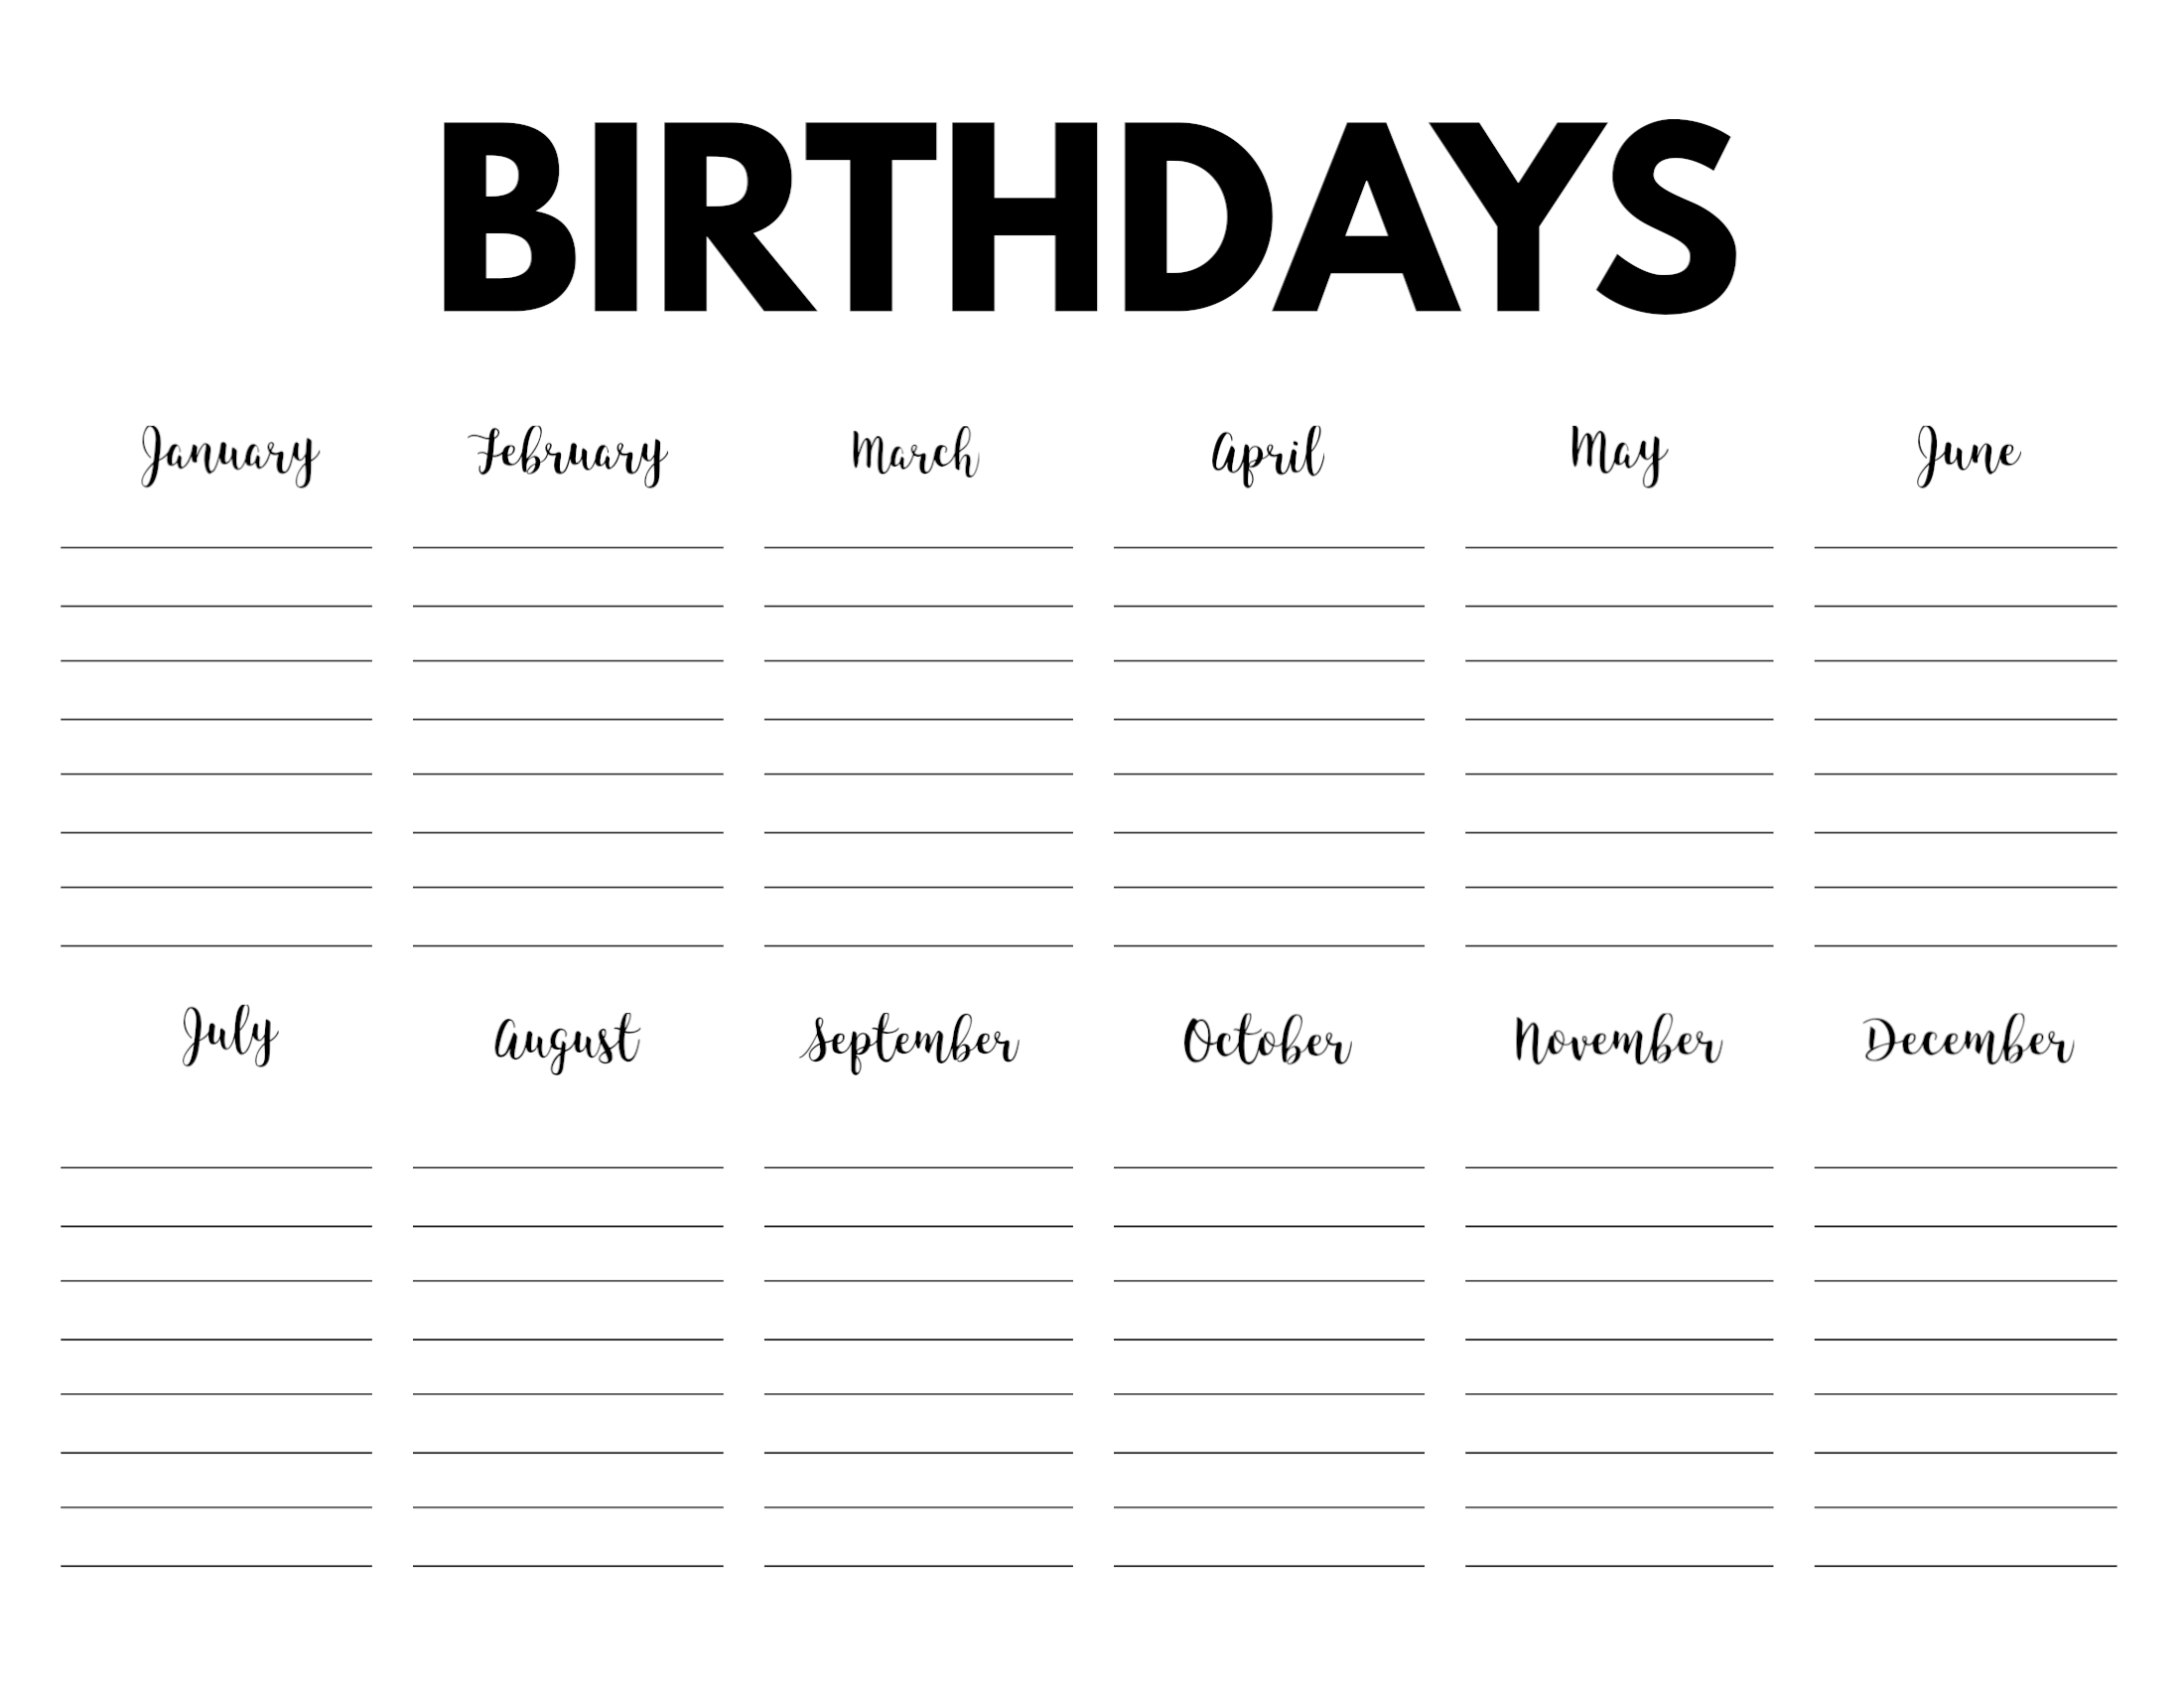 Free Printable Birthday Calendar Template  Paper Trail Design with regard to Monthly Birthday Calendar Template